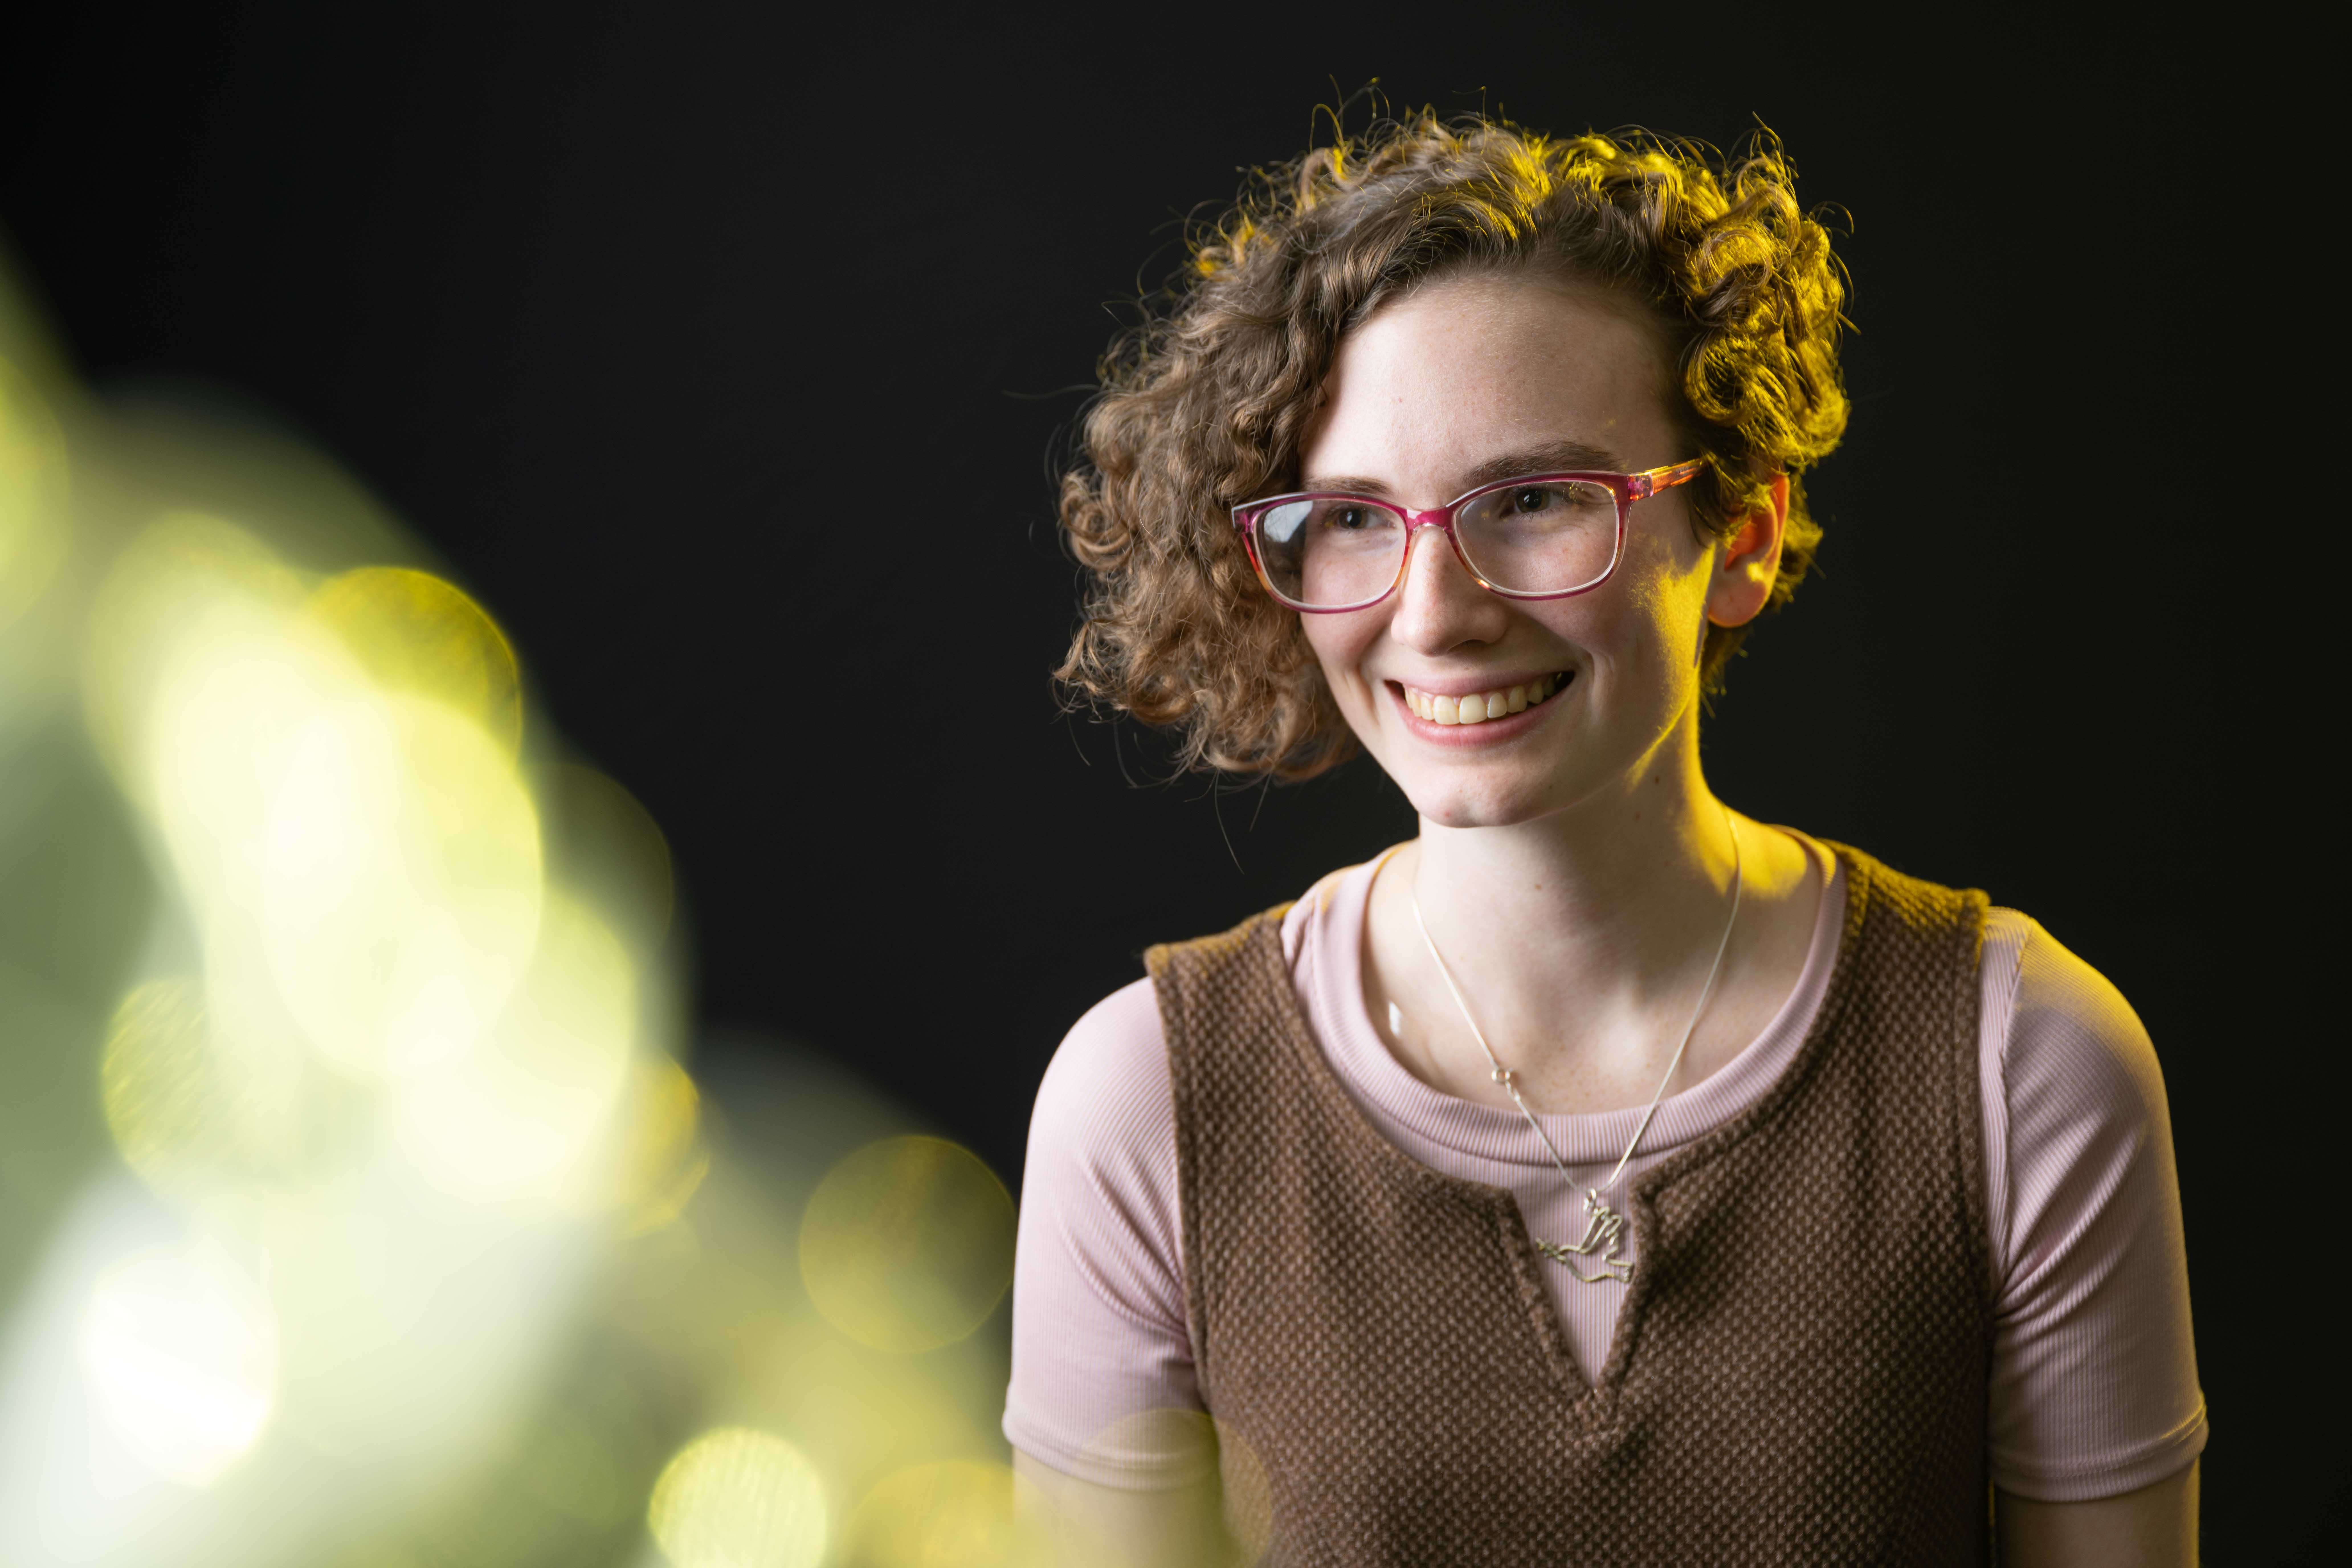 Flannery standing in front of a black background and smiling. She has short curly hair and is wearing glasses and a light purple and brown dress.